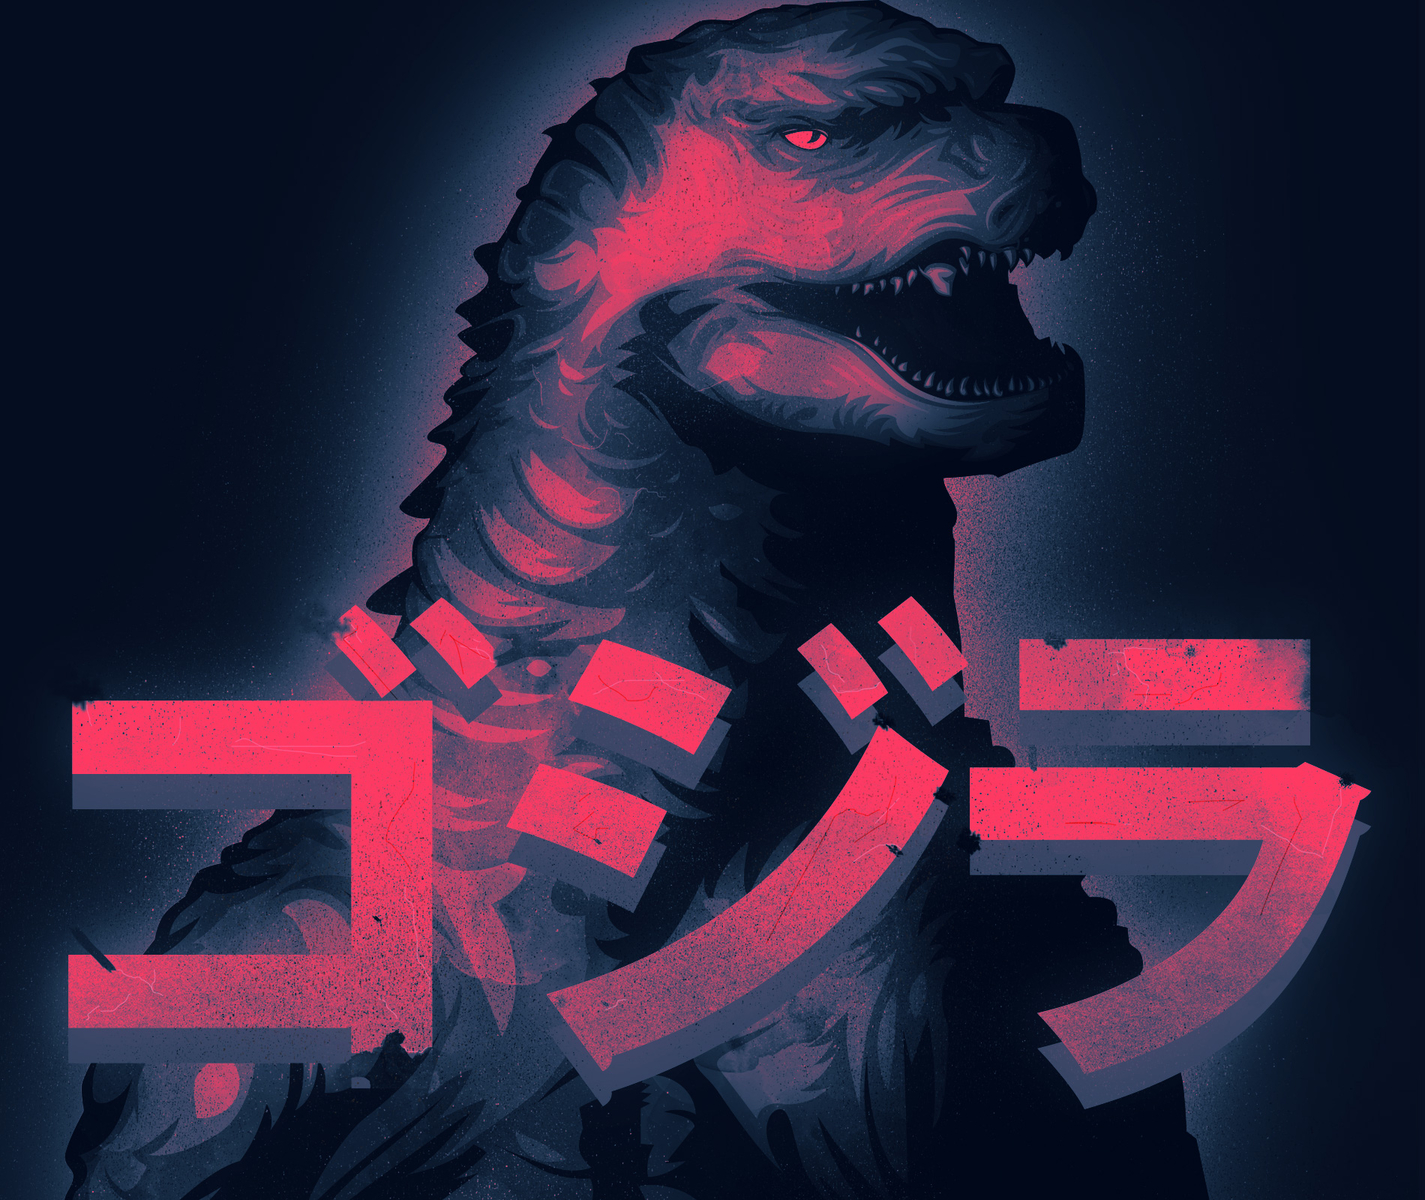 Godzilla is here by Tyler Pate on Dribbble